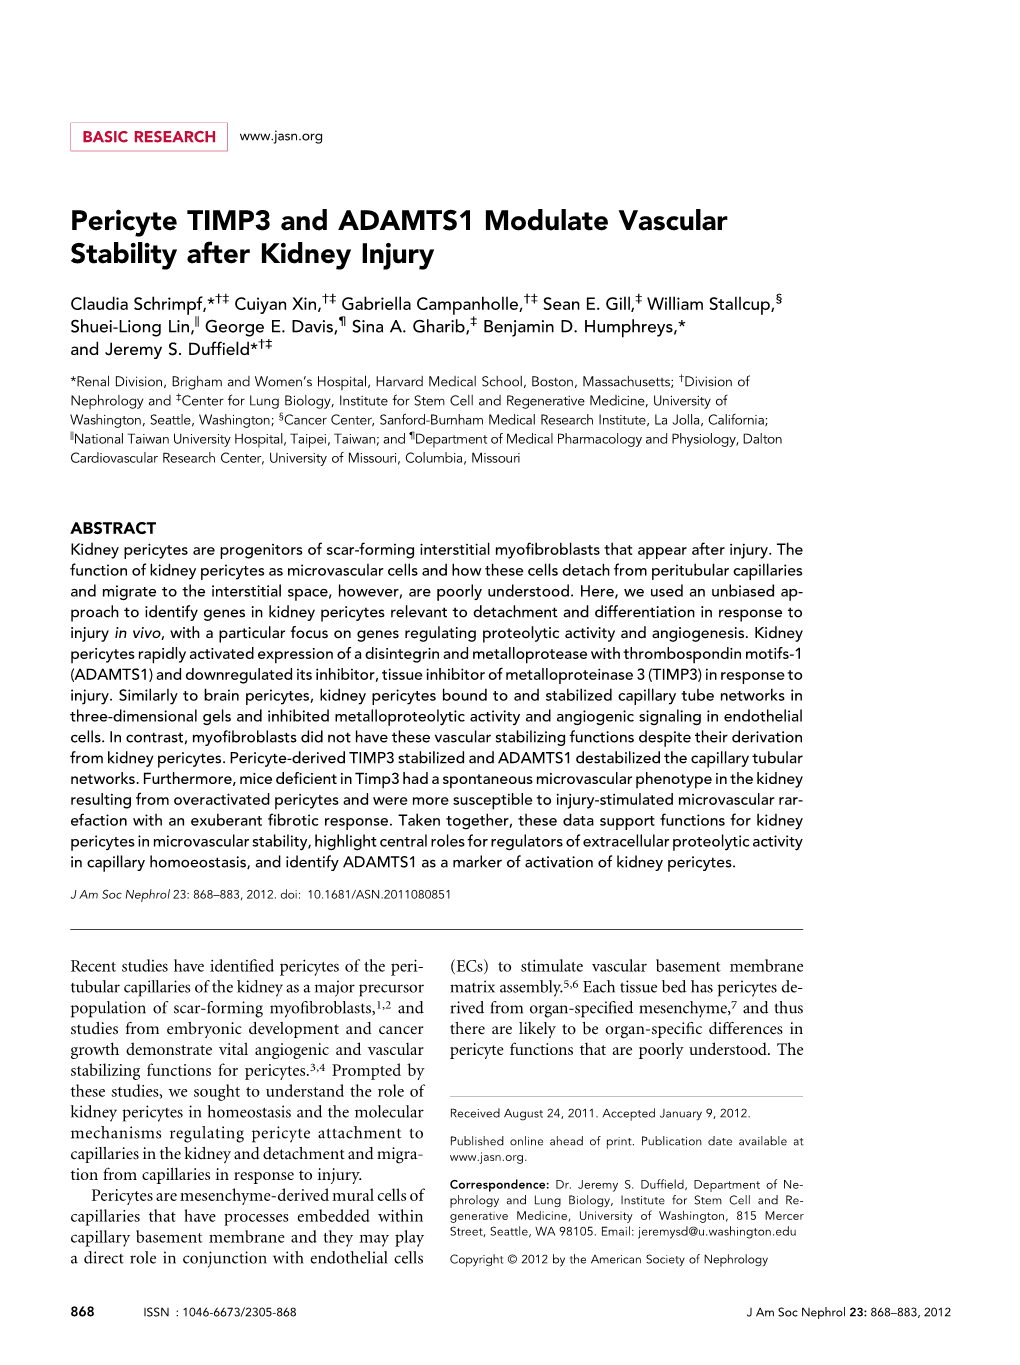 Pericyte TIMP3 and ADAMTS1 Modulate Vascular Stability After Kidney Injury